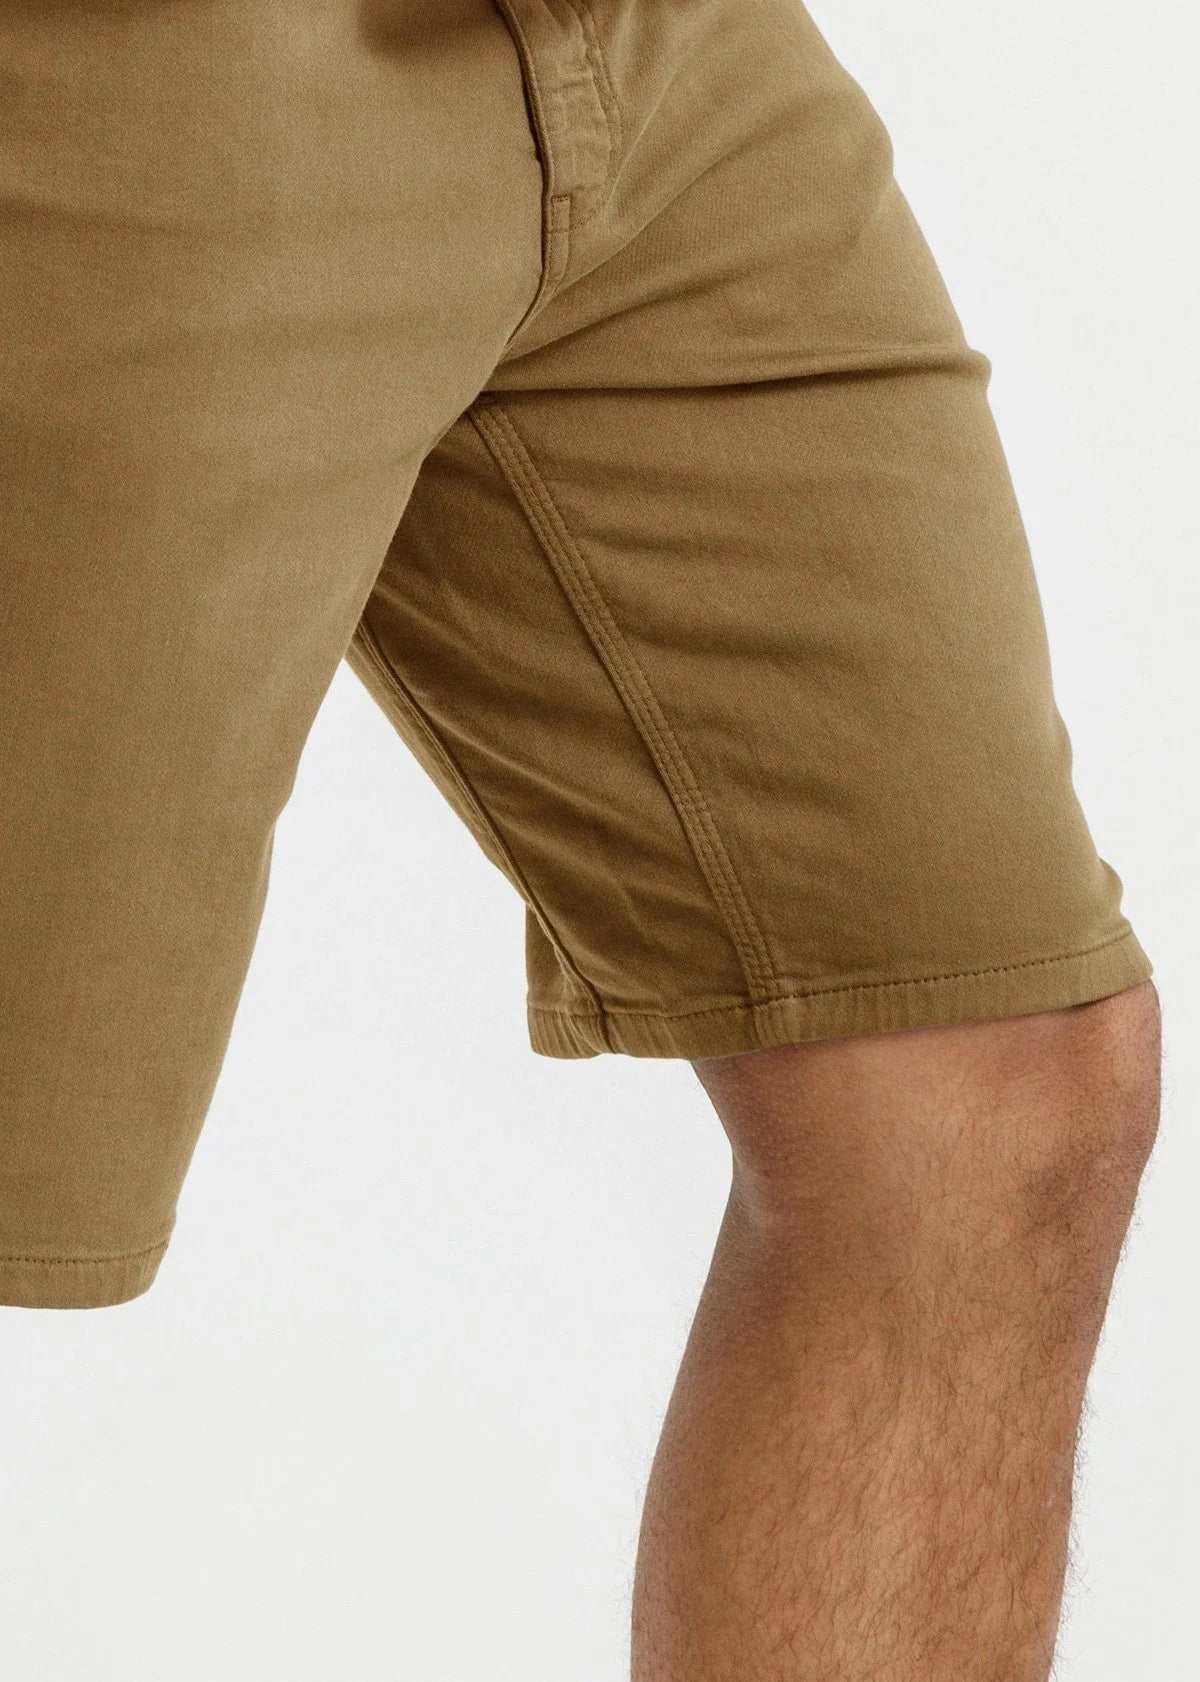 'Du/er No Sweat Shorts Relaxed' in 'Tobacco' colour